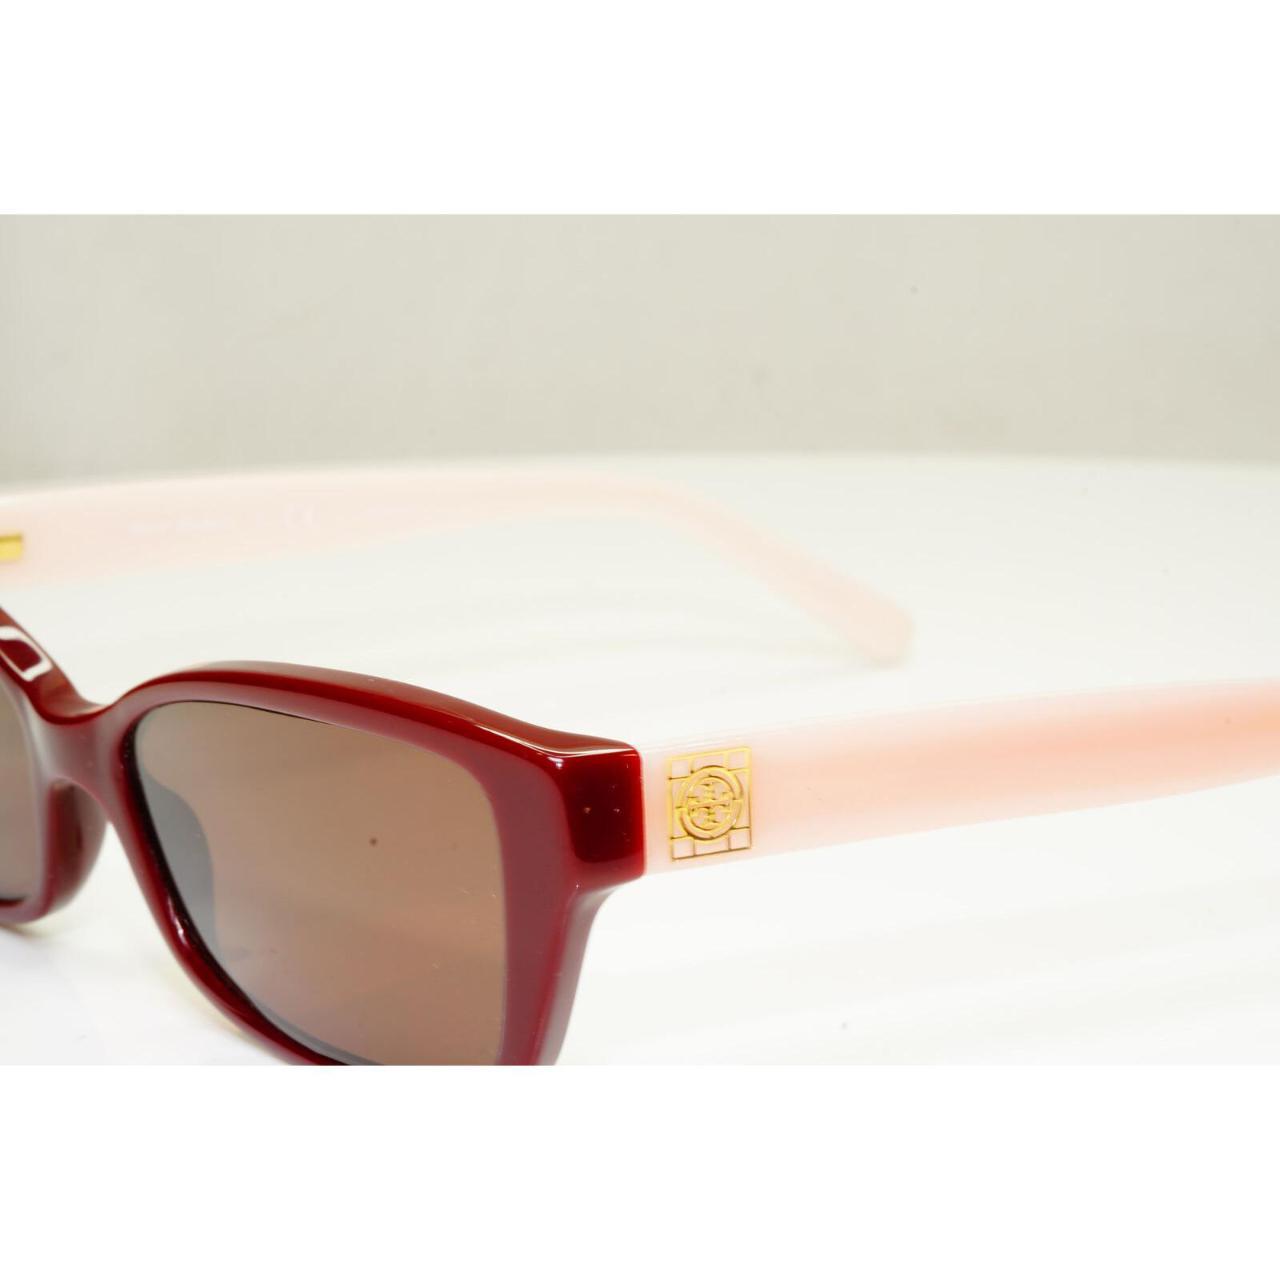 Product Image 3 - These sunglasses and all other